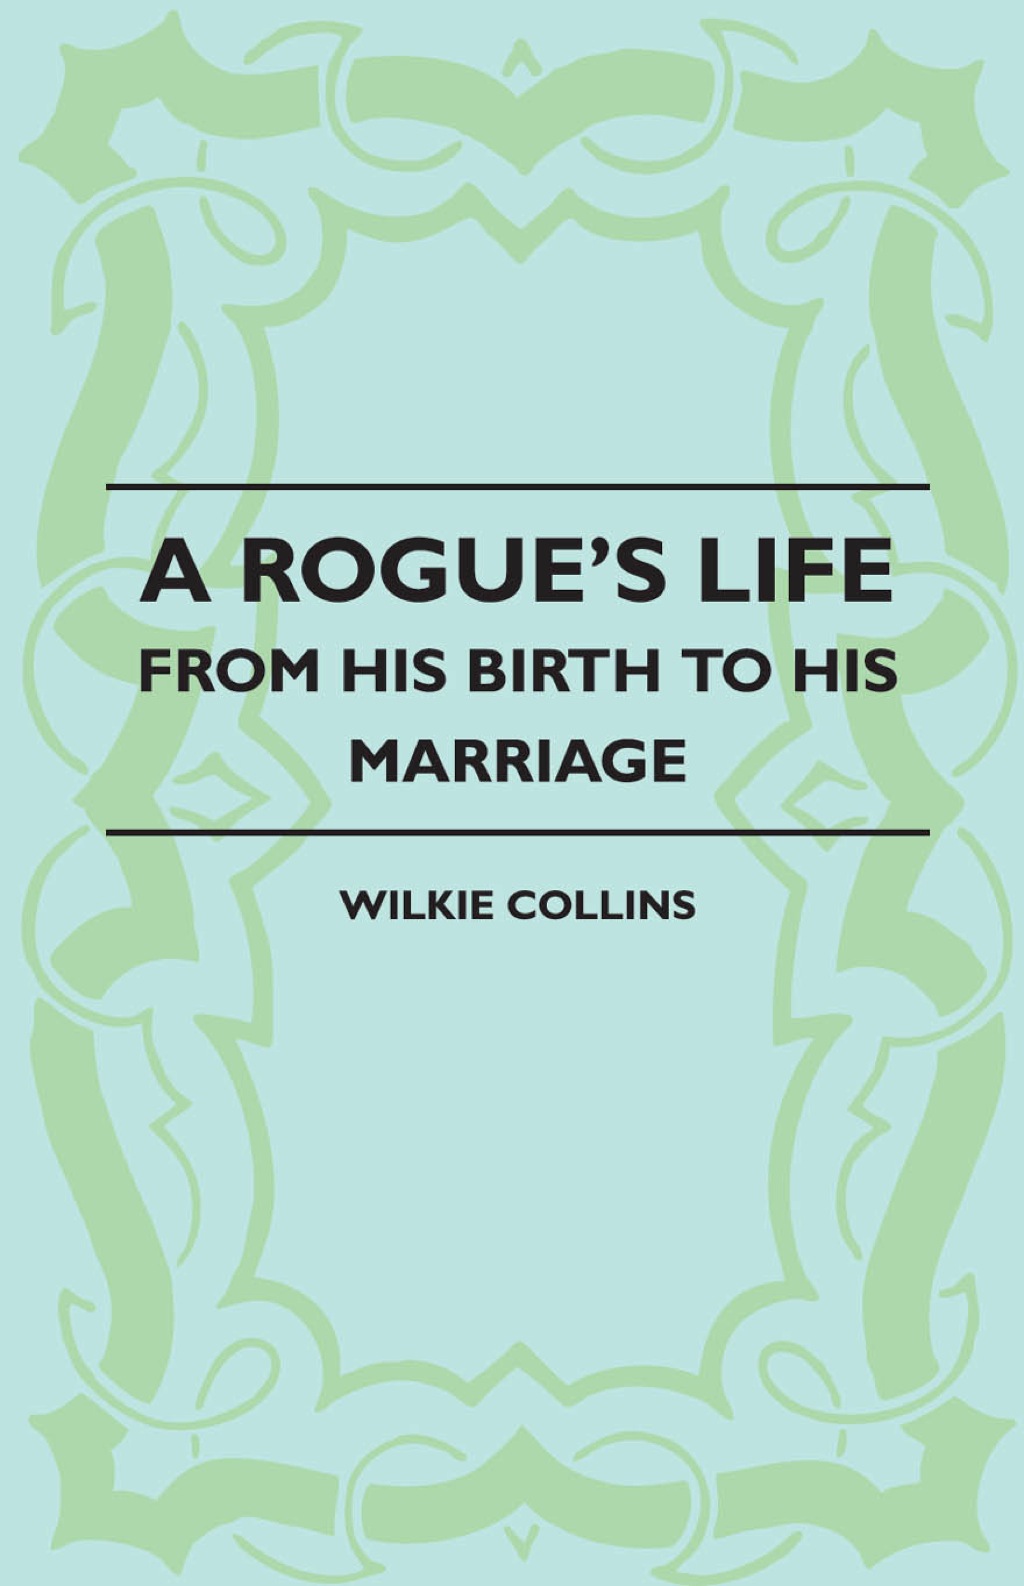 A Rogue's Life - From His Birth to His Marriage (eBook) - Wilkie Collins,